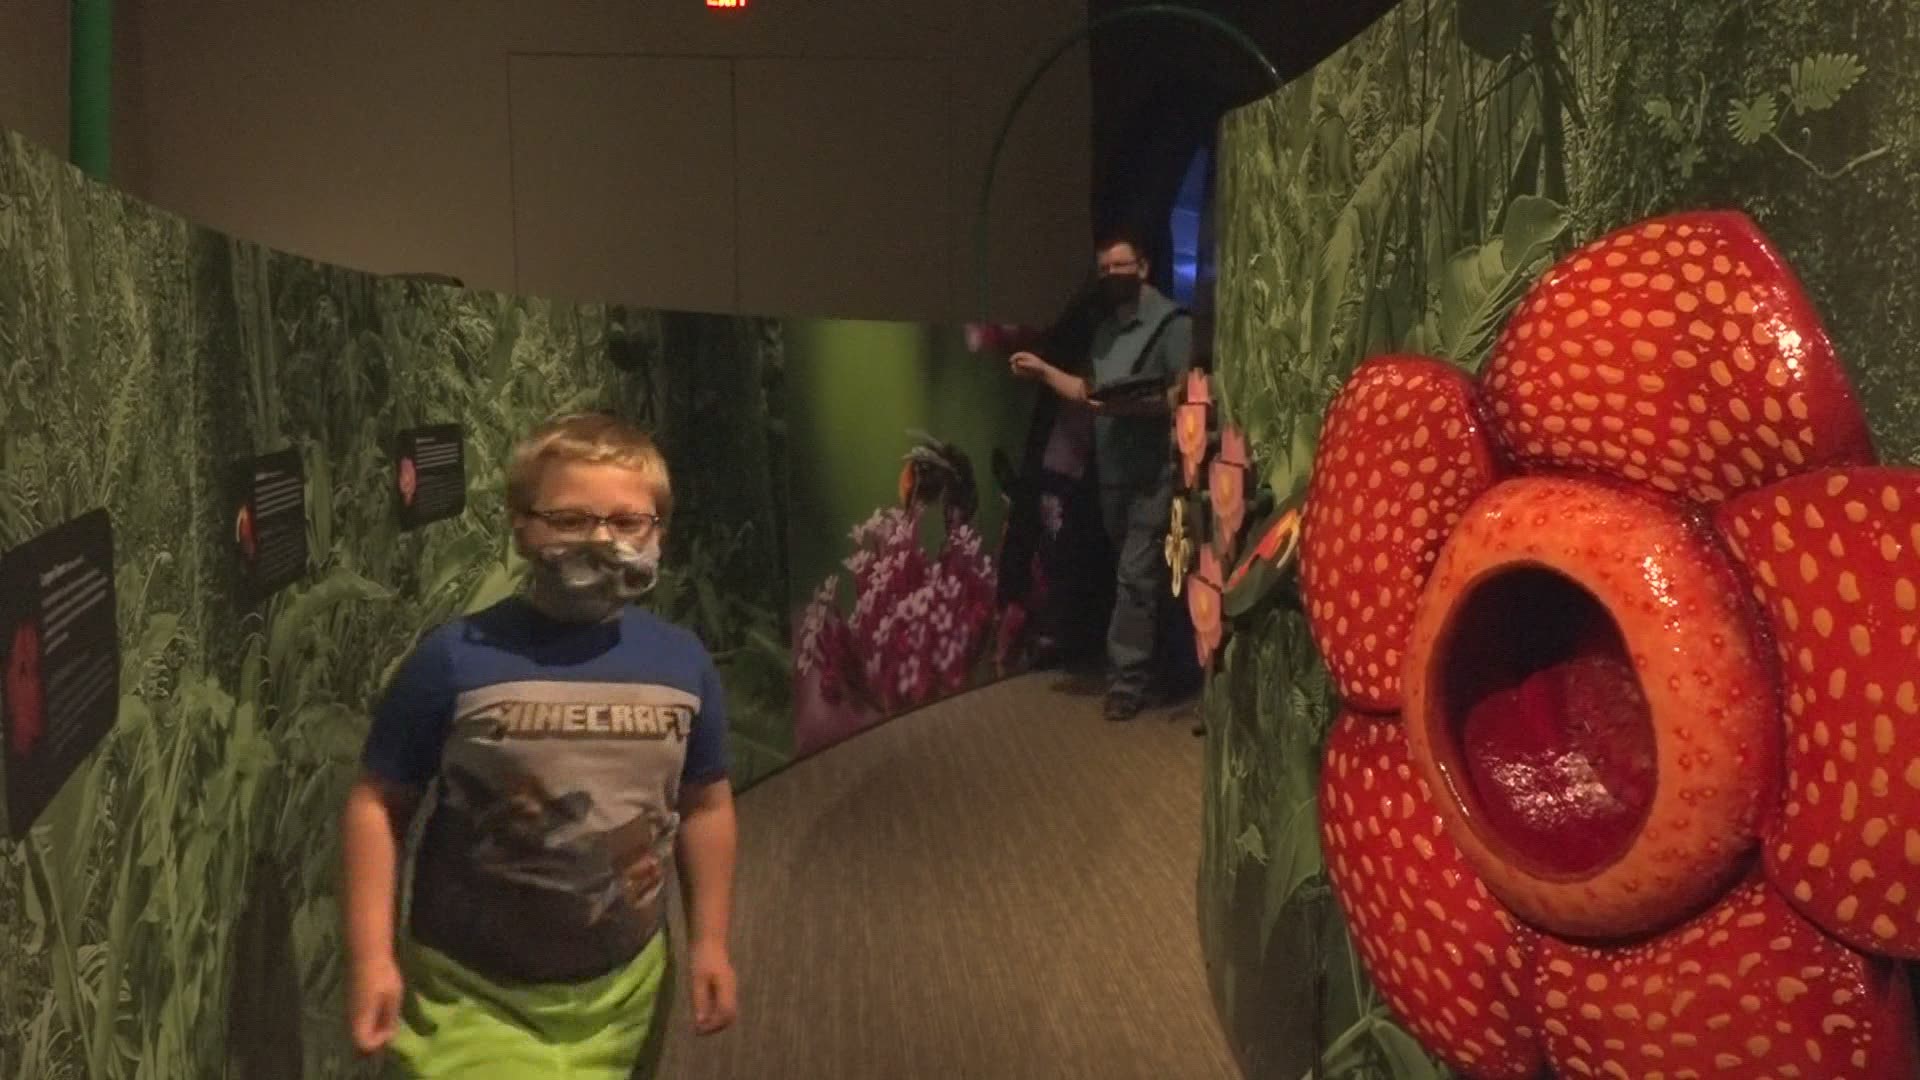 The maze includes 48 “survival missions” that allow visitors to step into the role of various pollinators, such as butterflies, bats and bees.